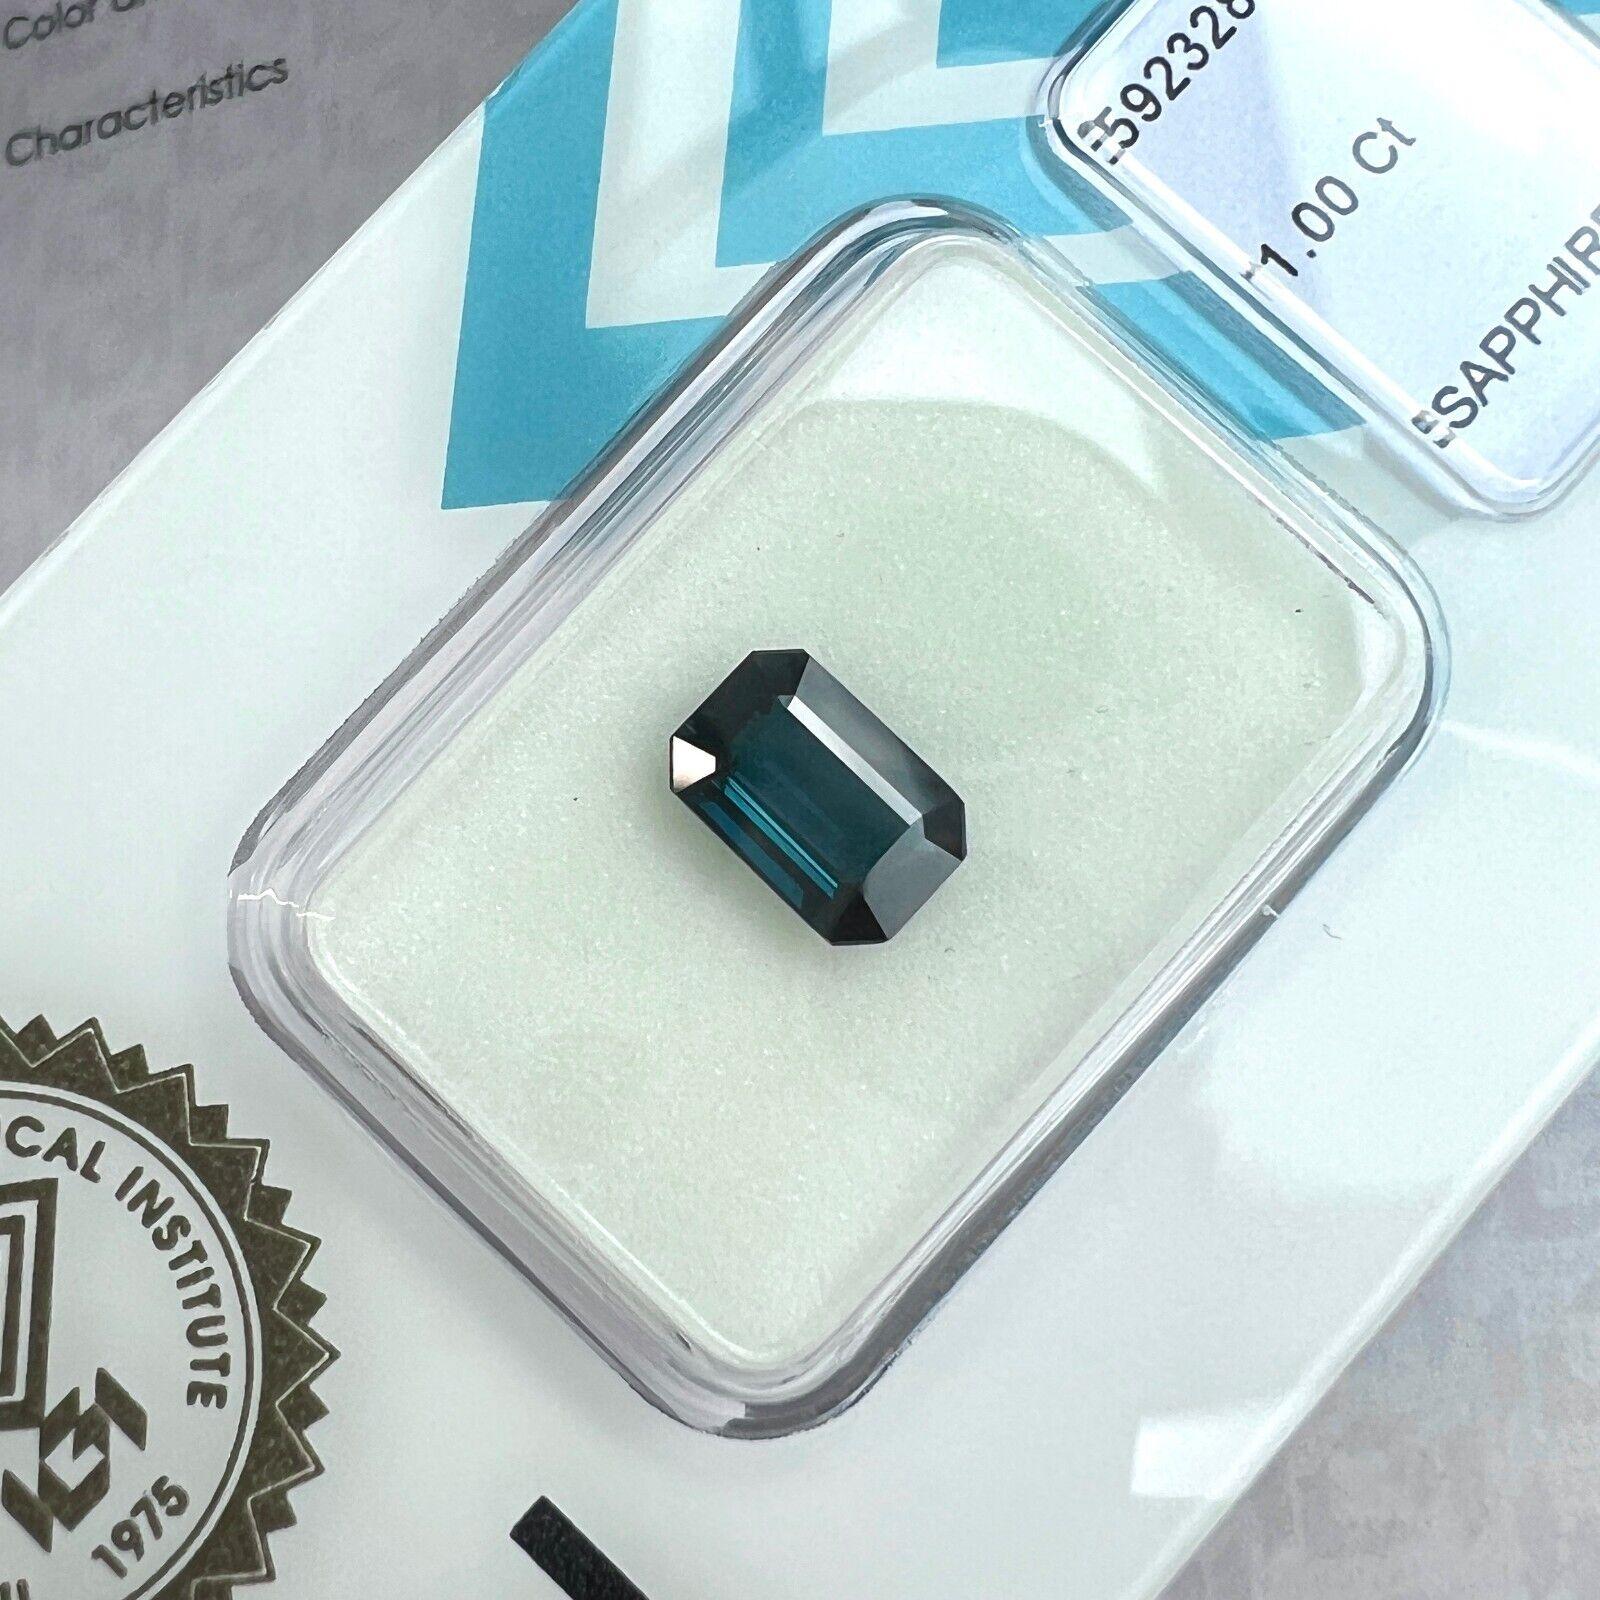 Natural 1.00ct Untreated Deep Blue Sapphire IGI Certified Emerald Octagon Cut

Natural Untreated Deep Blue Sapphire In IGI Blister.
1.00 Carat with a stunning deep blue colour, an excellent octagonal emerald cut and excellent clarity. VVS.
Fully